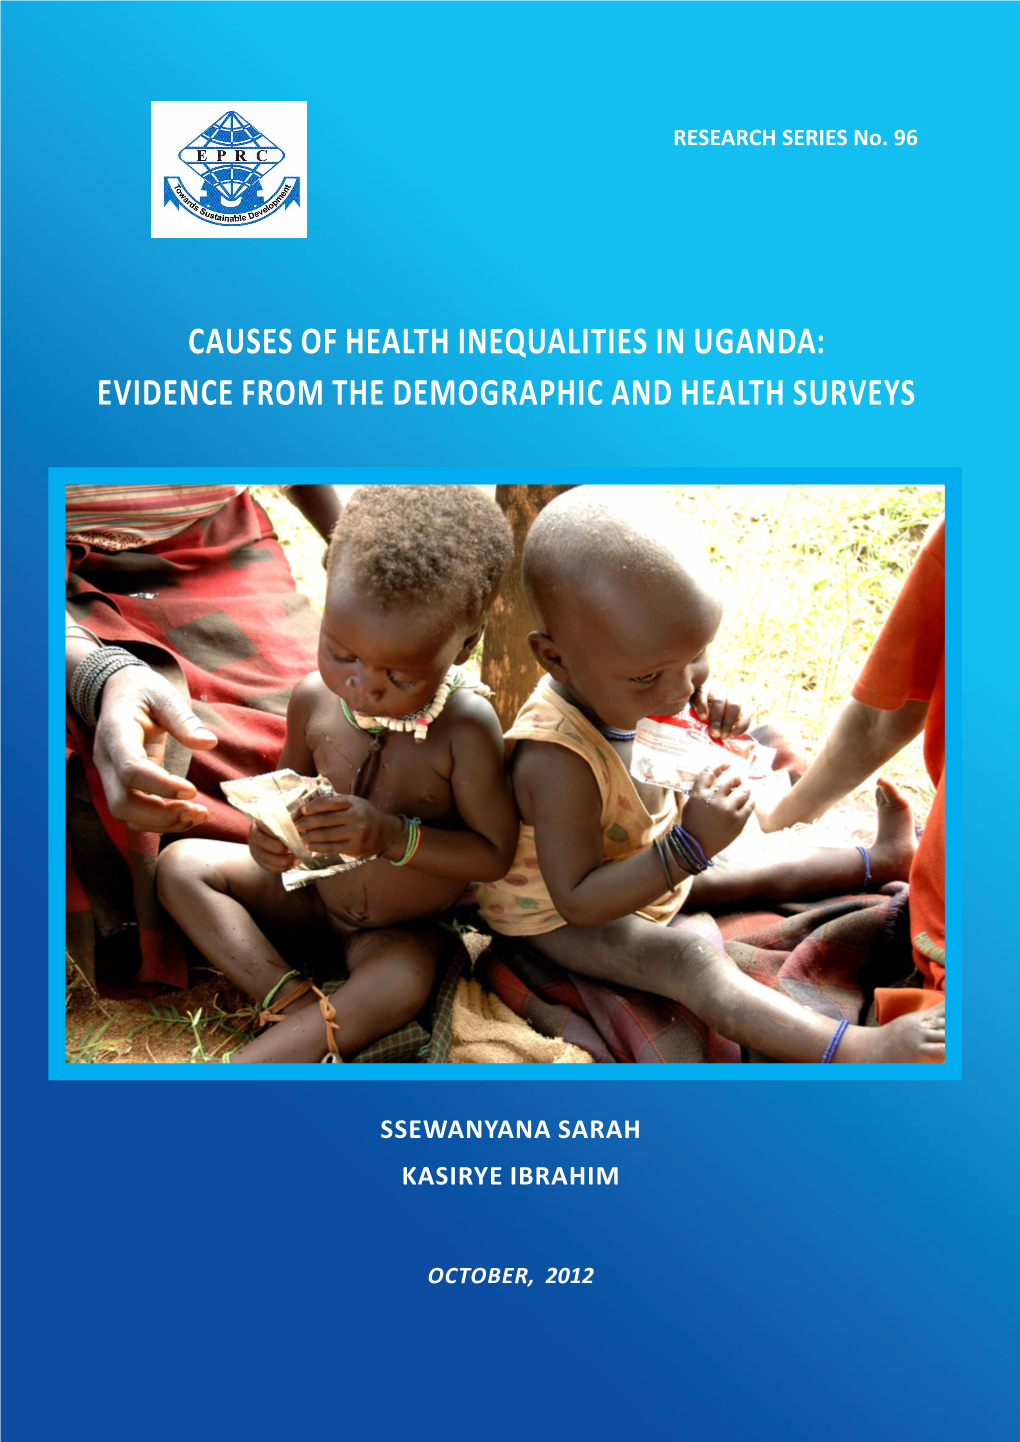 Causes of Health Inequalities in Uganda: Evidence from the Demographic and Health Surveys